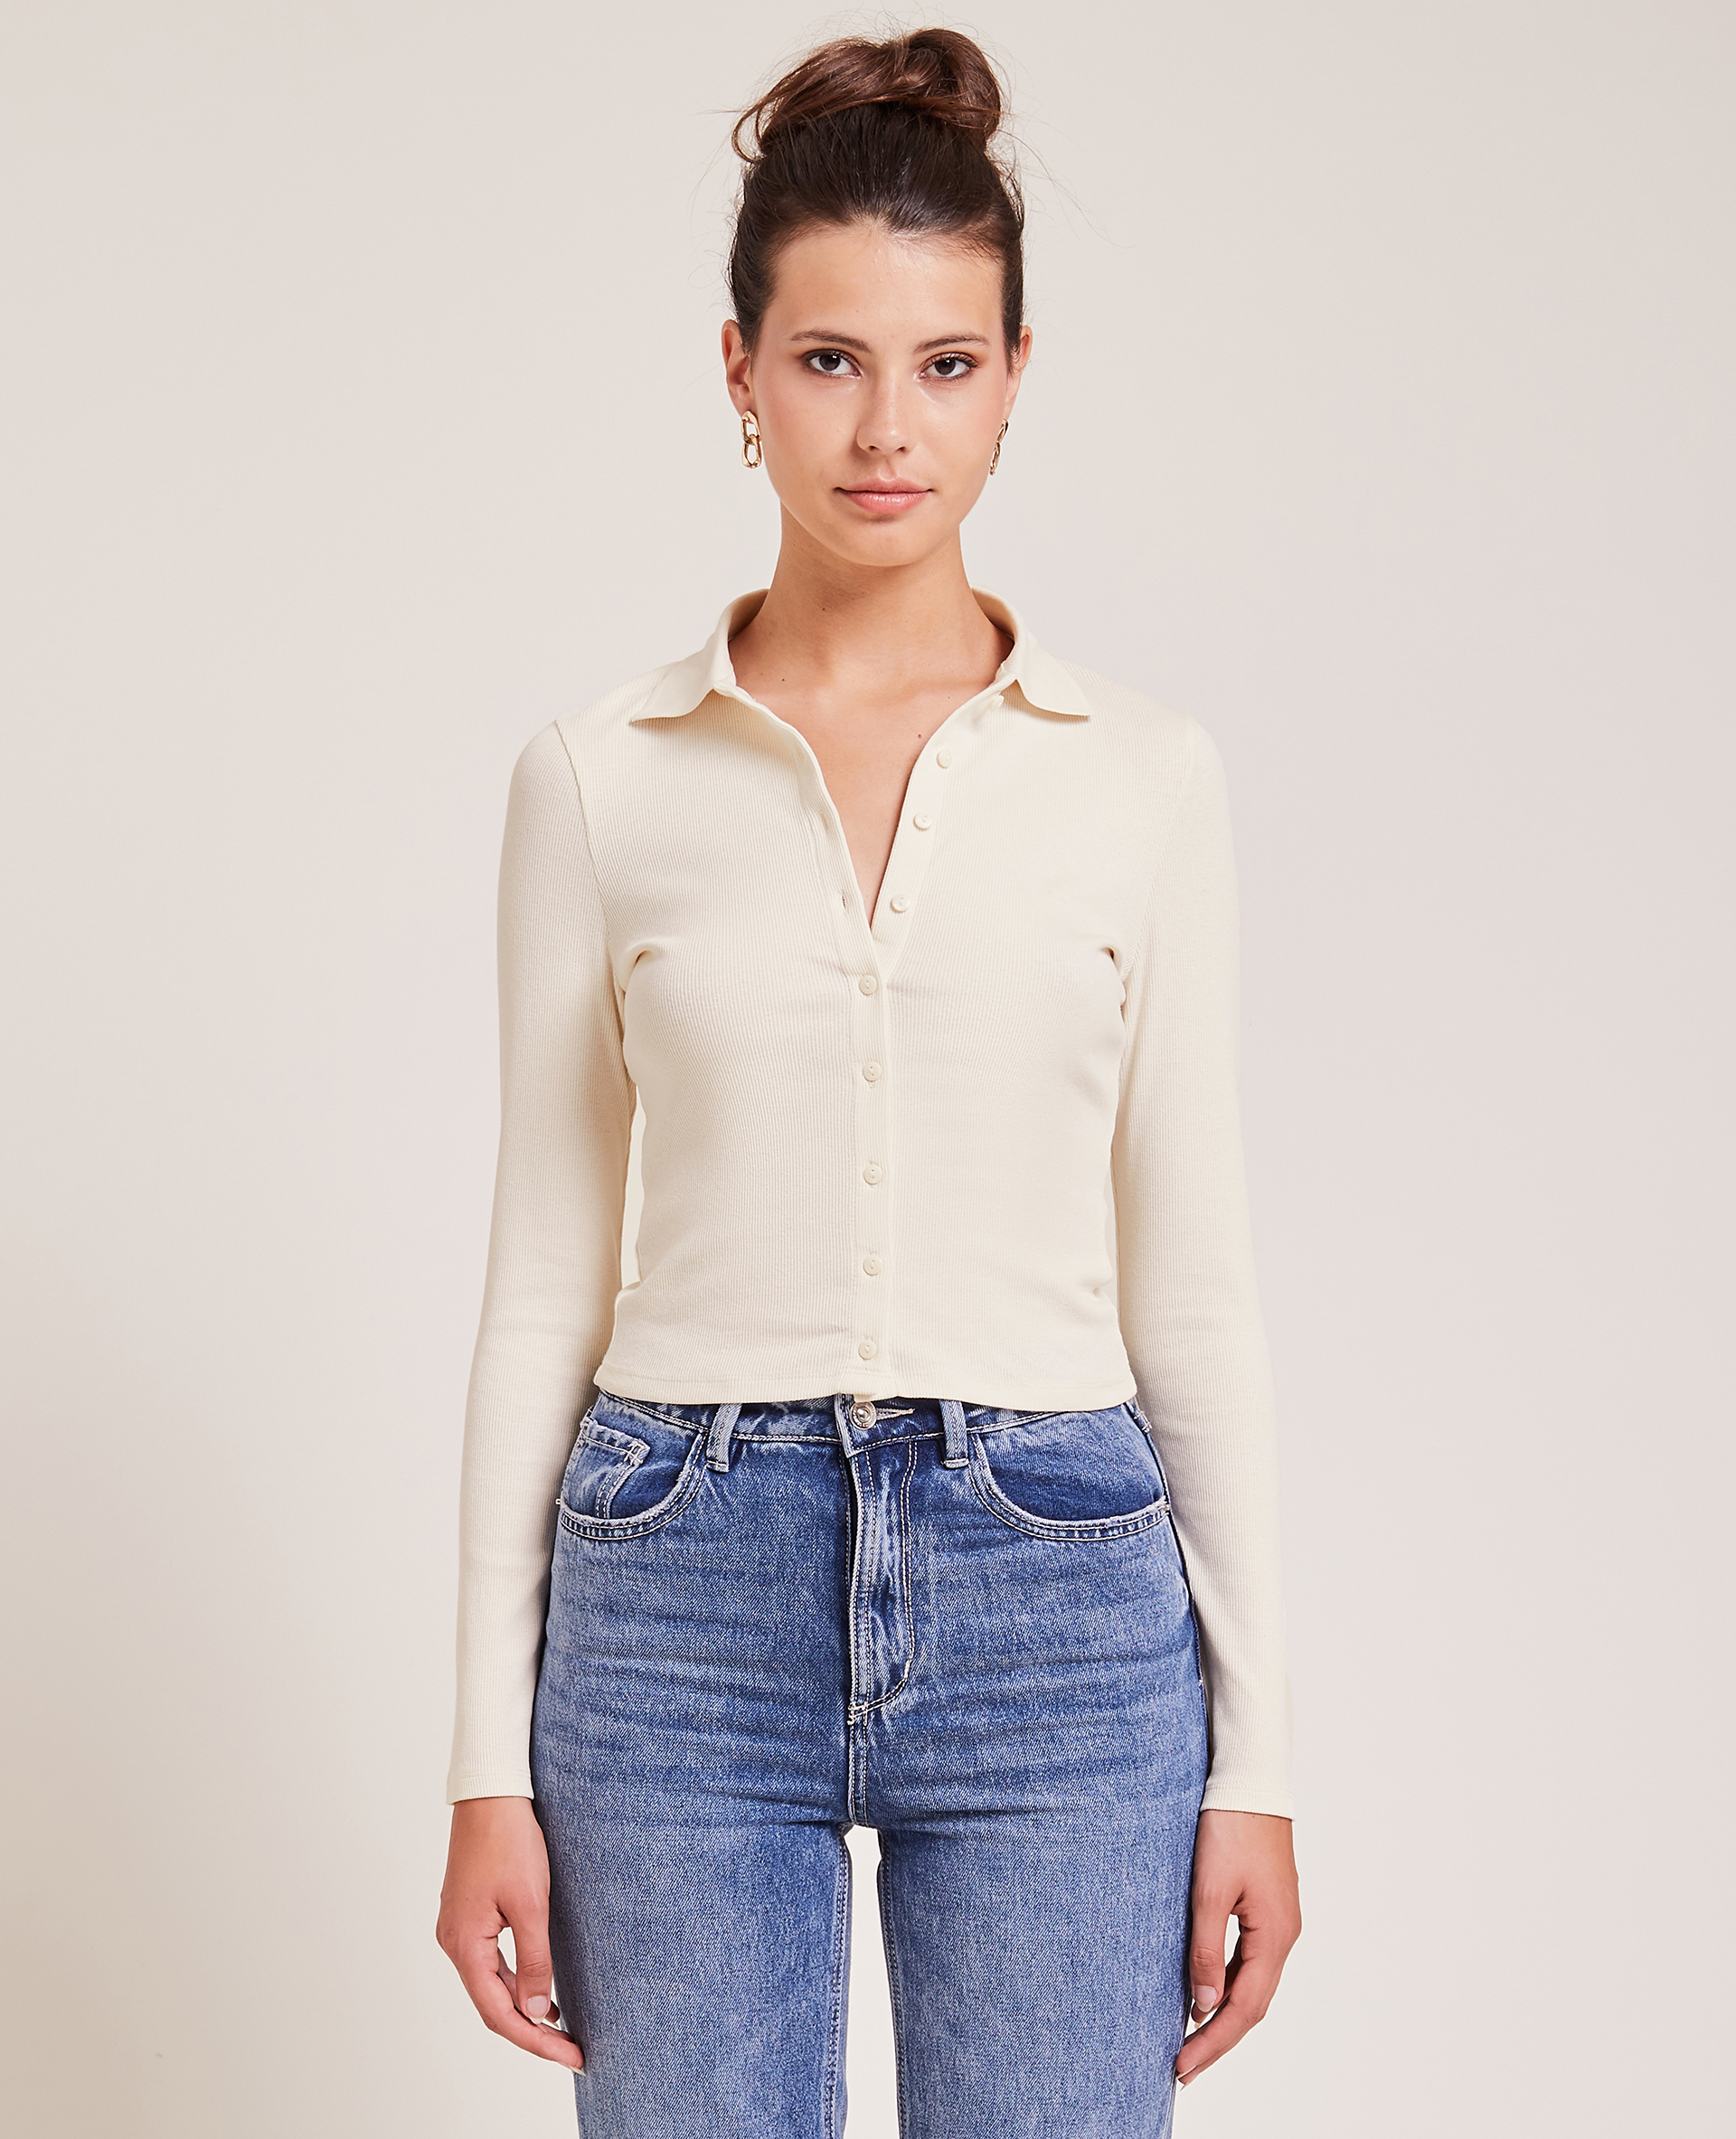 Top manches longues col polo blanc - Pimkie